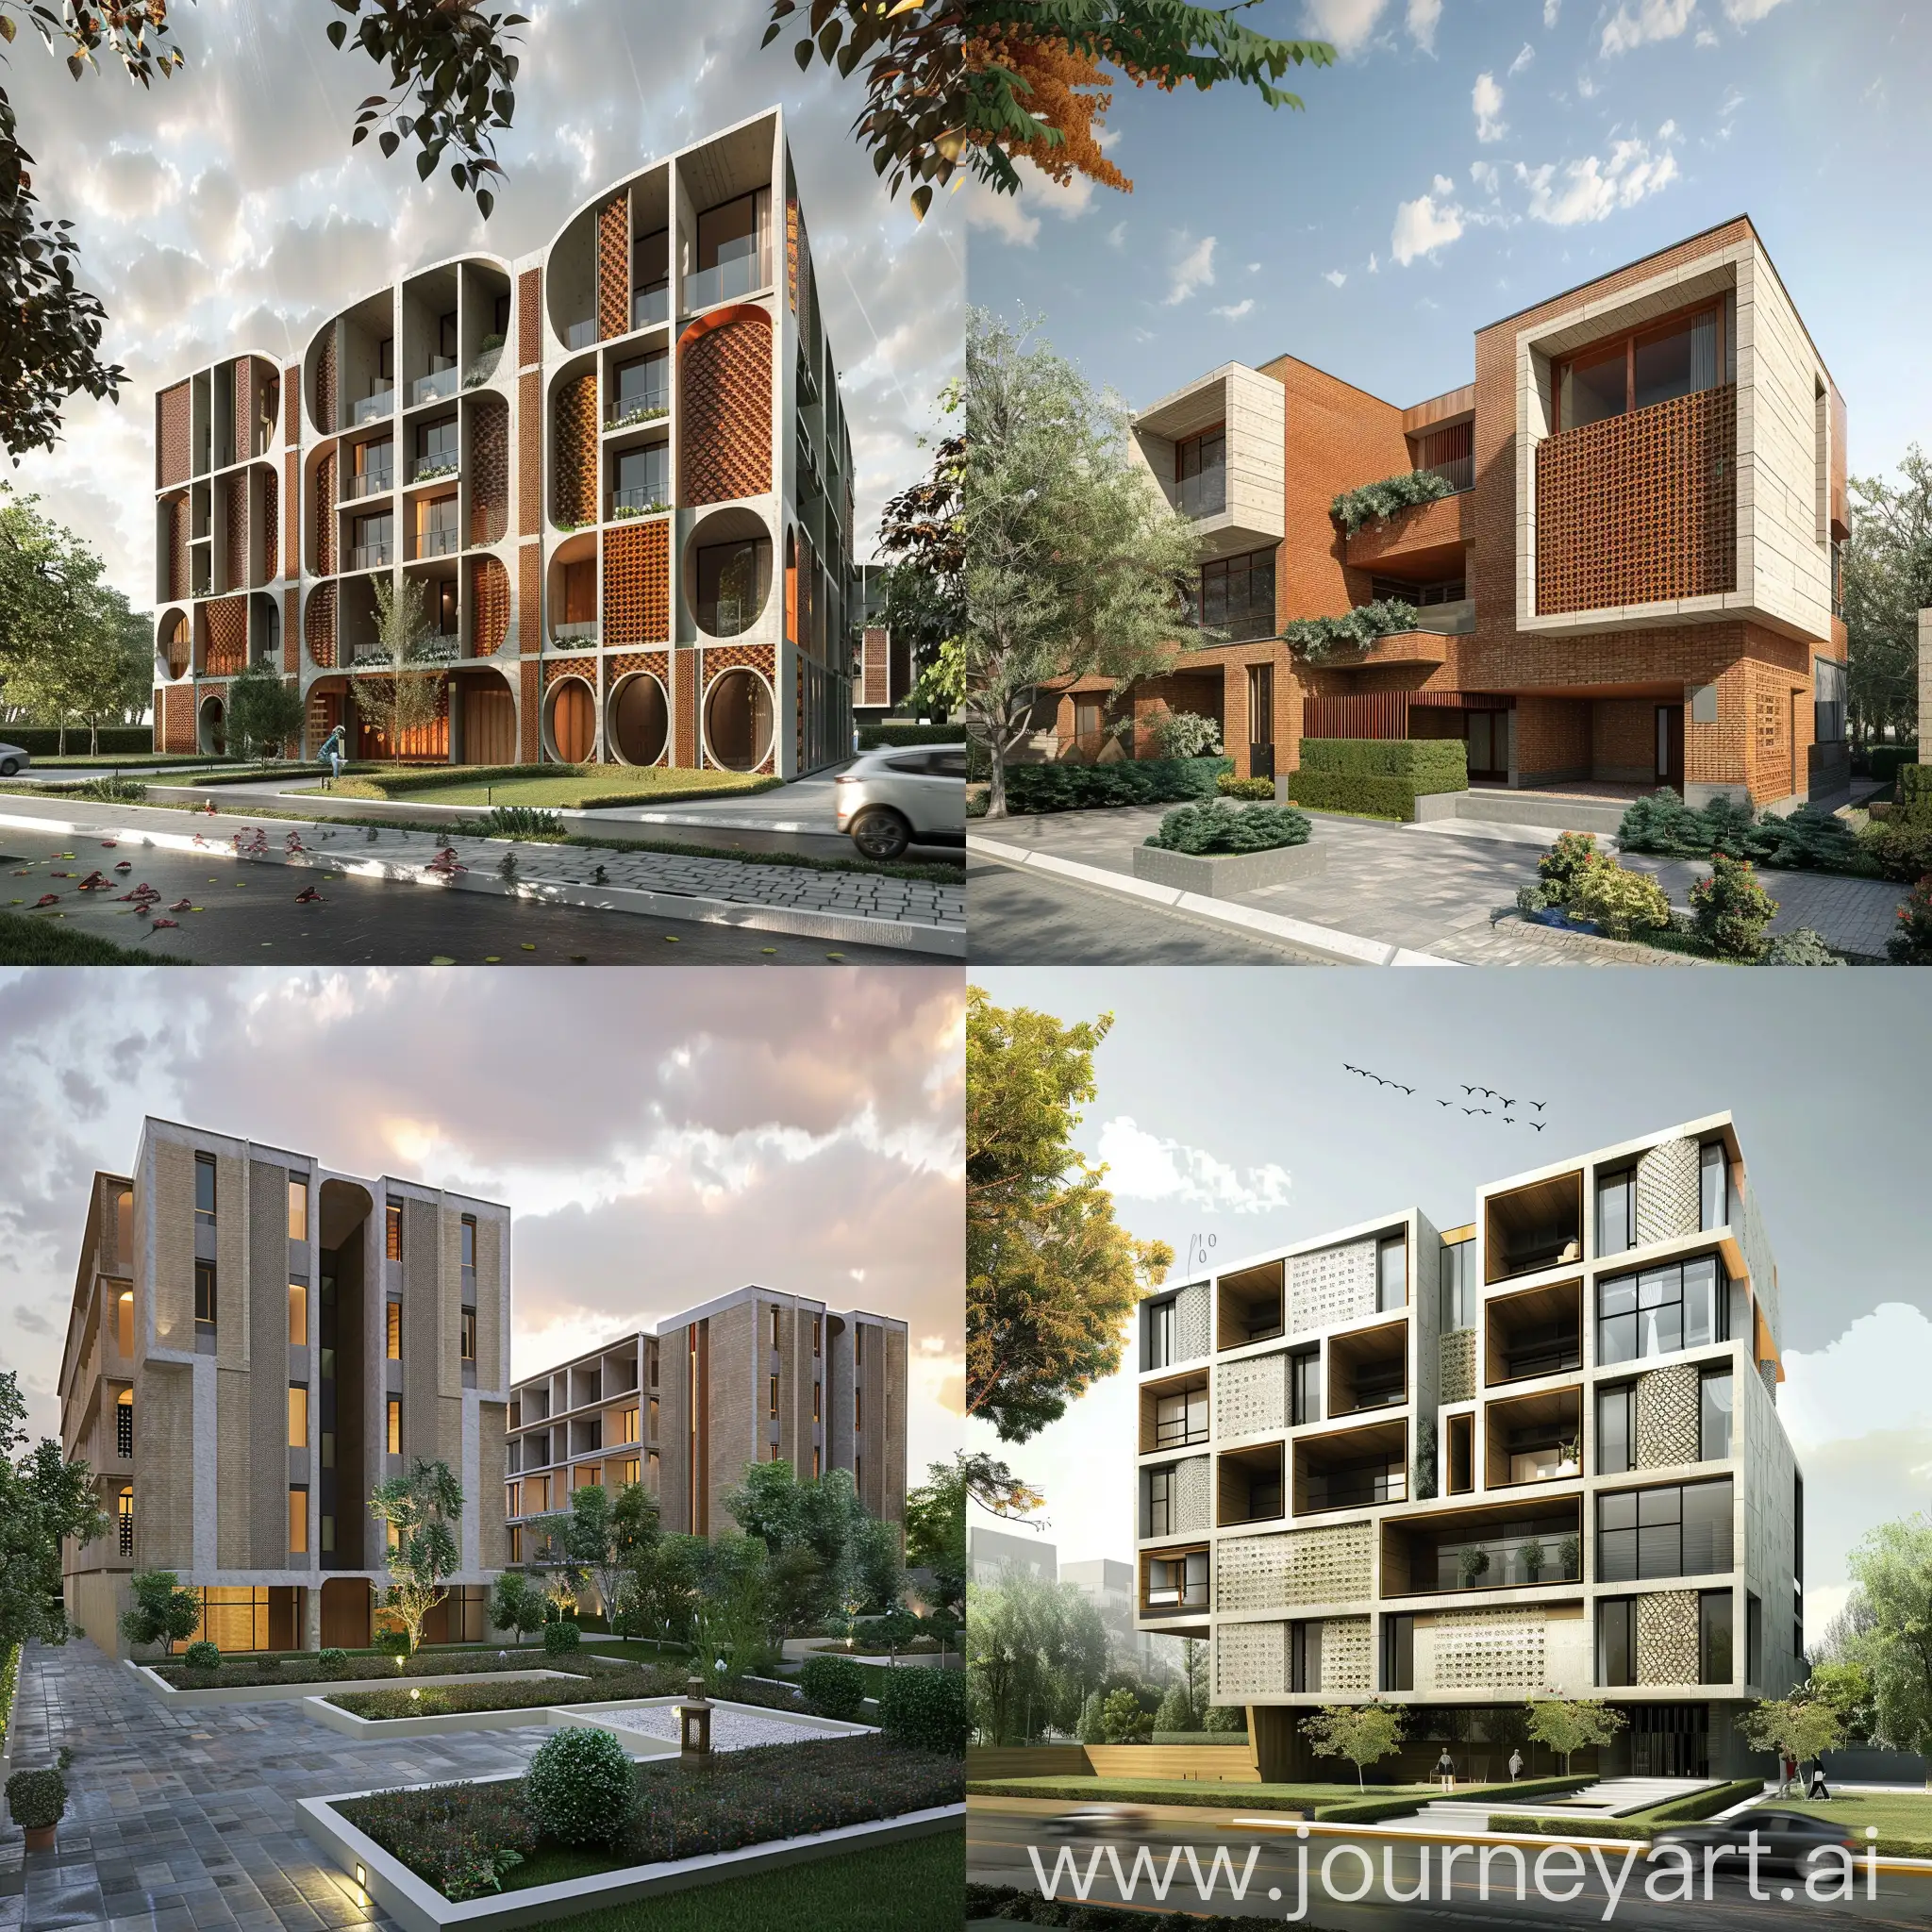 Architectural design of residential complex with Iranian design and Iranian identity for Iranians